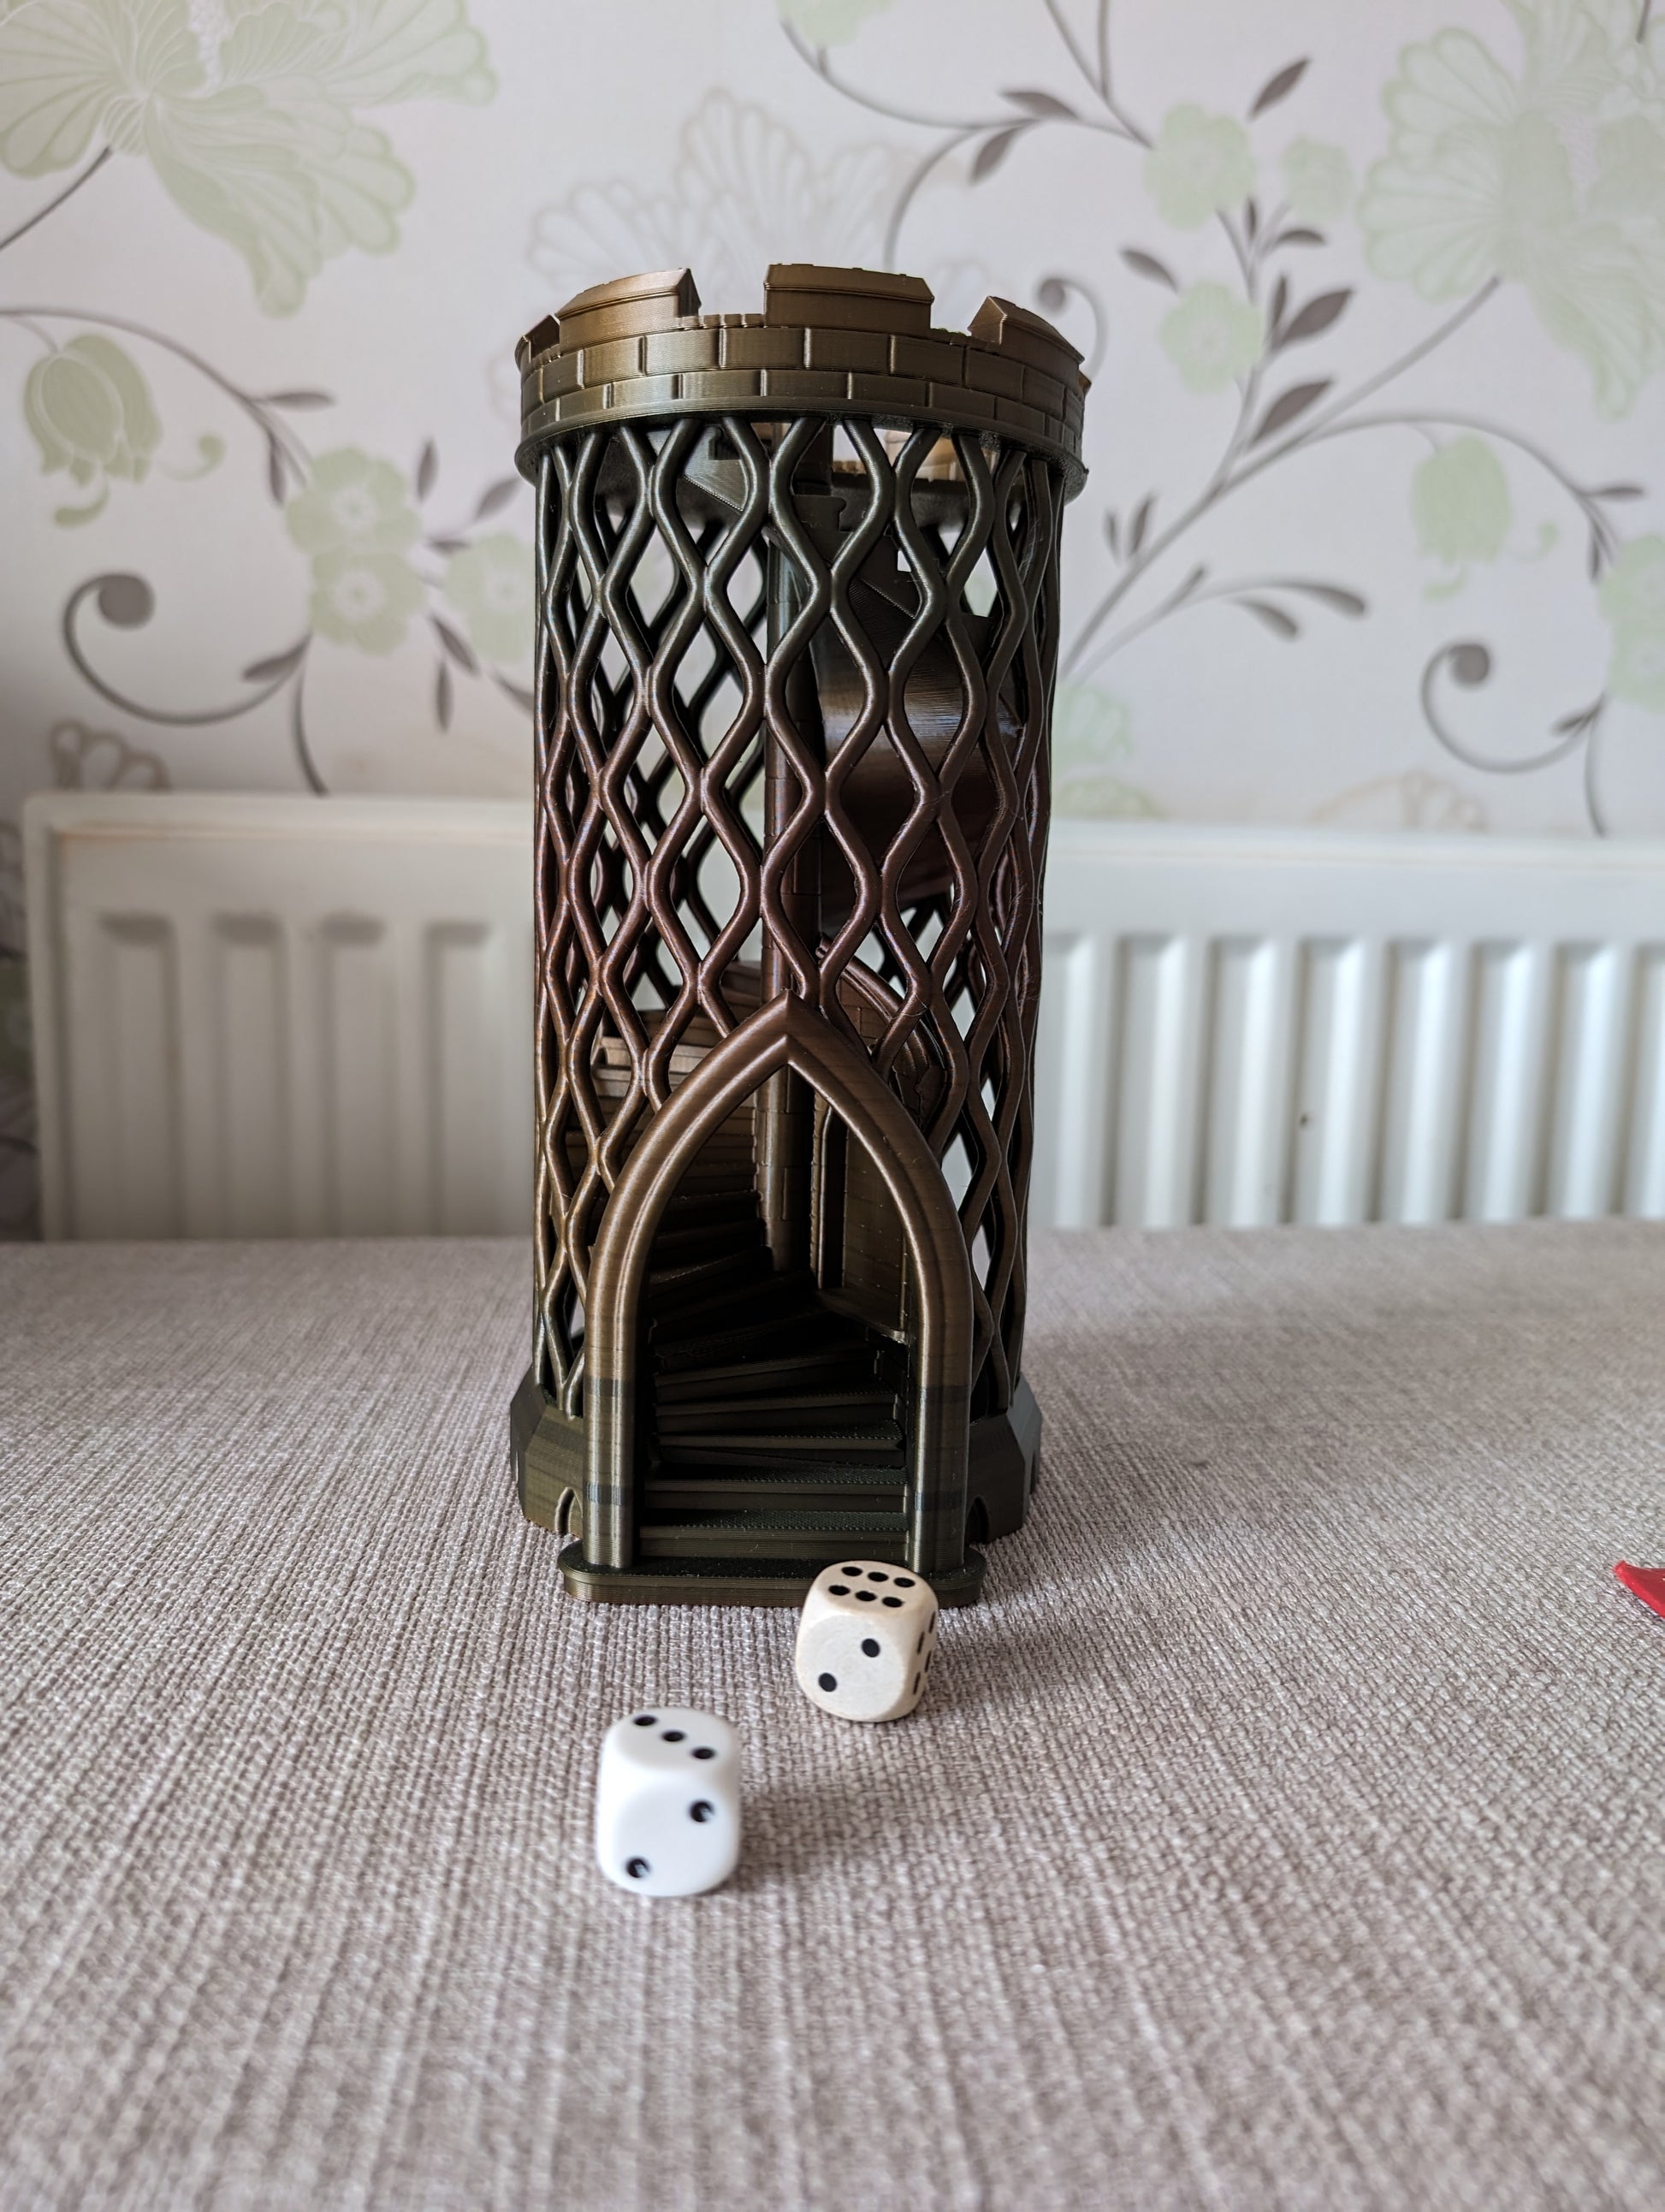 Castle turret dice tower from the front close up without dice catcher